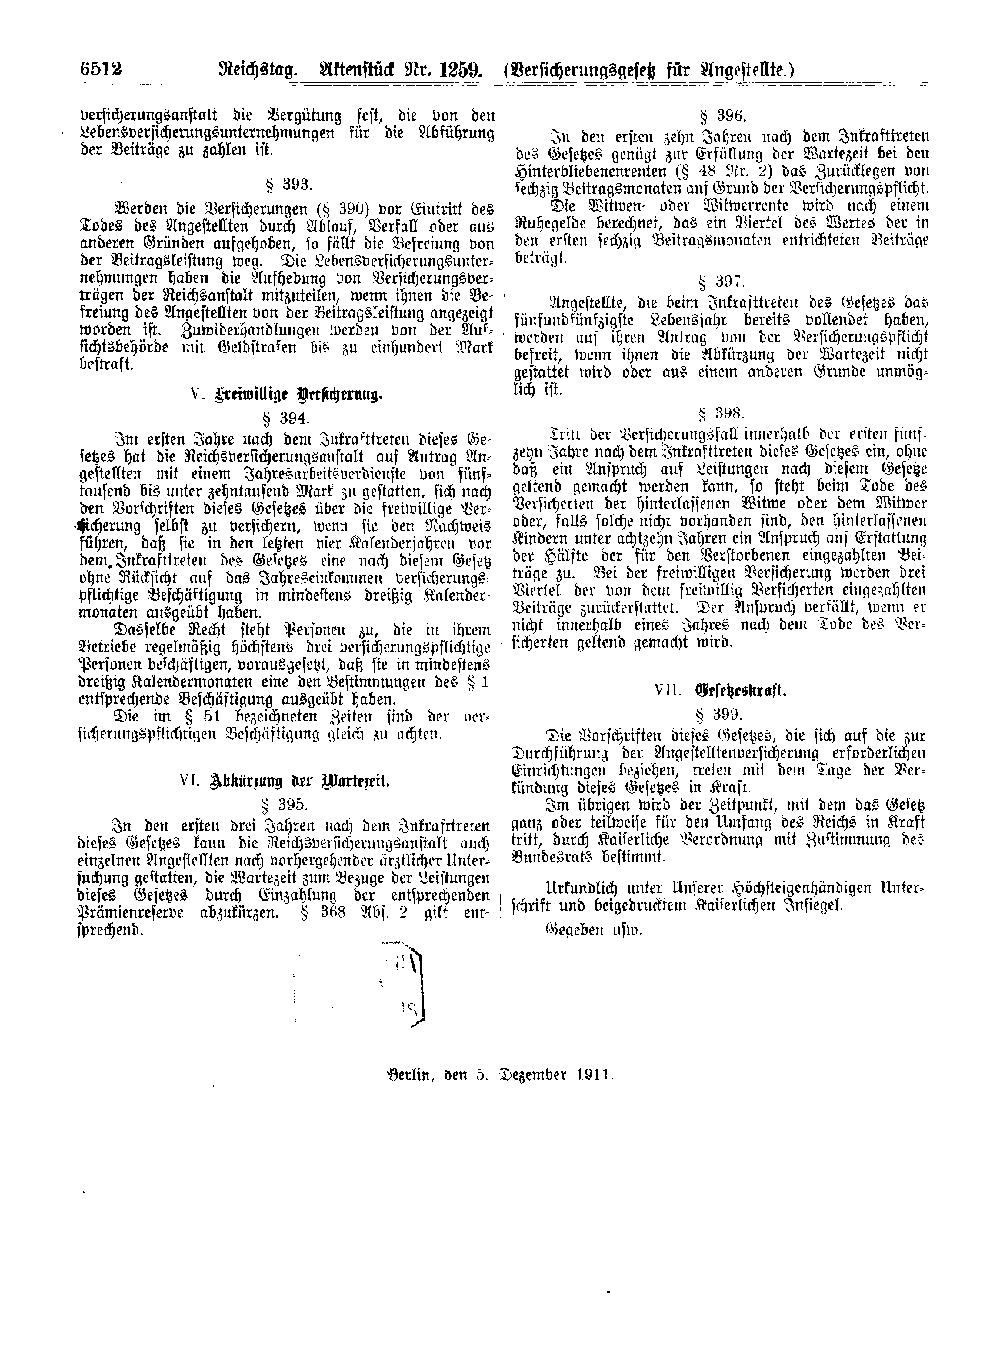 Scan of page 6512